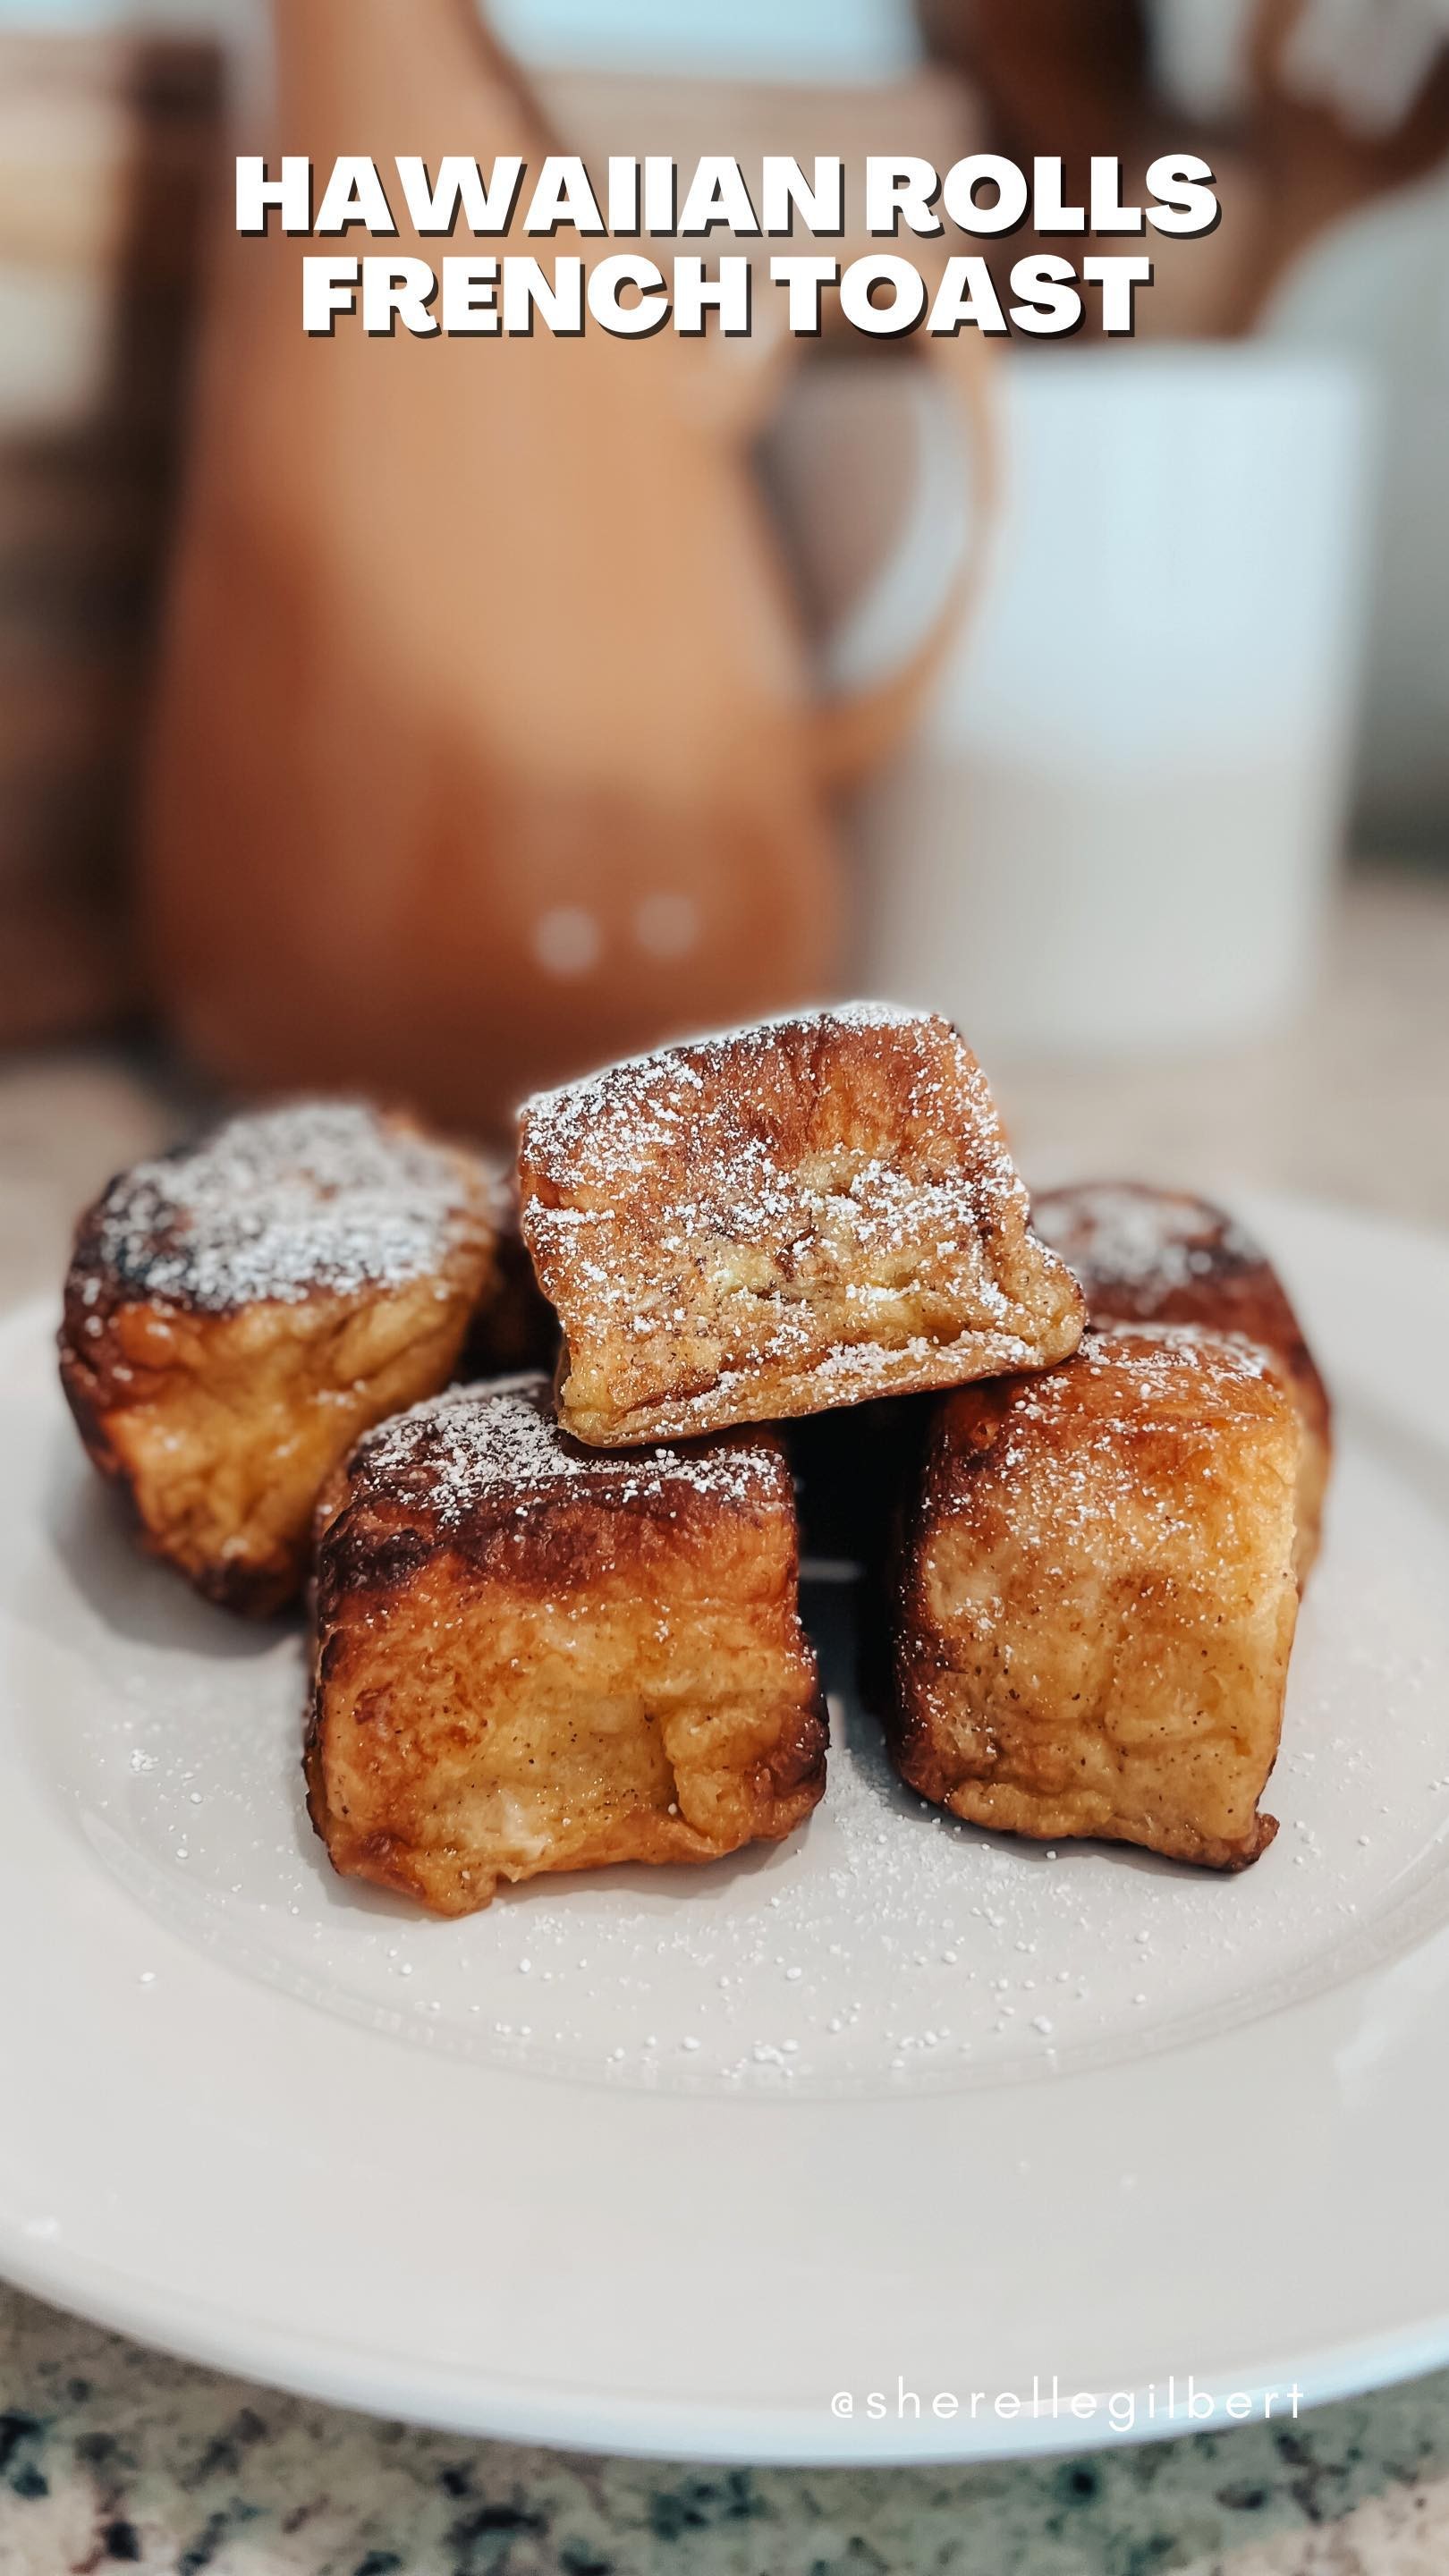 Happy Sunday! 

Since some of y’all are here because of my Tuscan chicken pasta, I thought I’d share another recipe that I recently made 😋 I love French toast and decided to remix it by using Hawaiian rolls. This is perfect for breakfast for your family, especially if you bake it. The rolls literally melt in your mouth 🤤 

Let me know if you’ve tried this! ⬇️
•
•
•
#easymealsforbreakfast #hawaiianrollsfrenchtoast #lifestyleinfluencer #huntsvilleinfluencer #mealsathome #eatingathome #browngirlbloggers #easymealideas